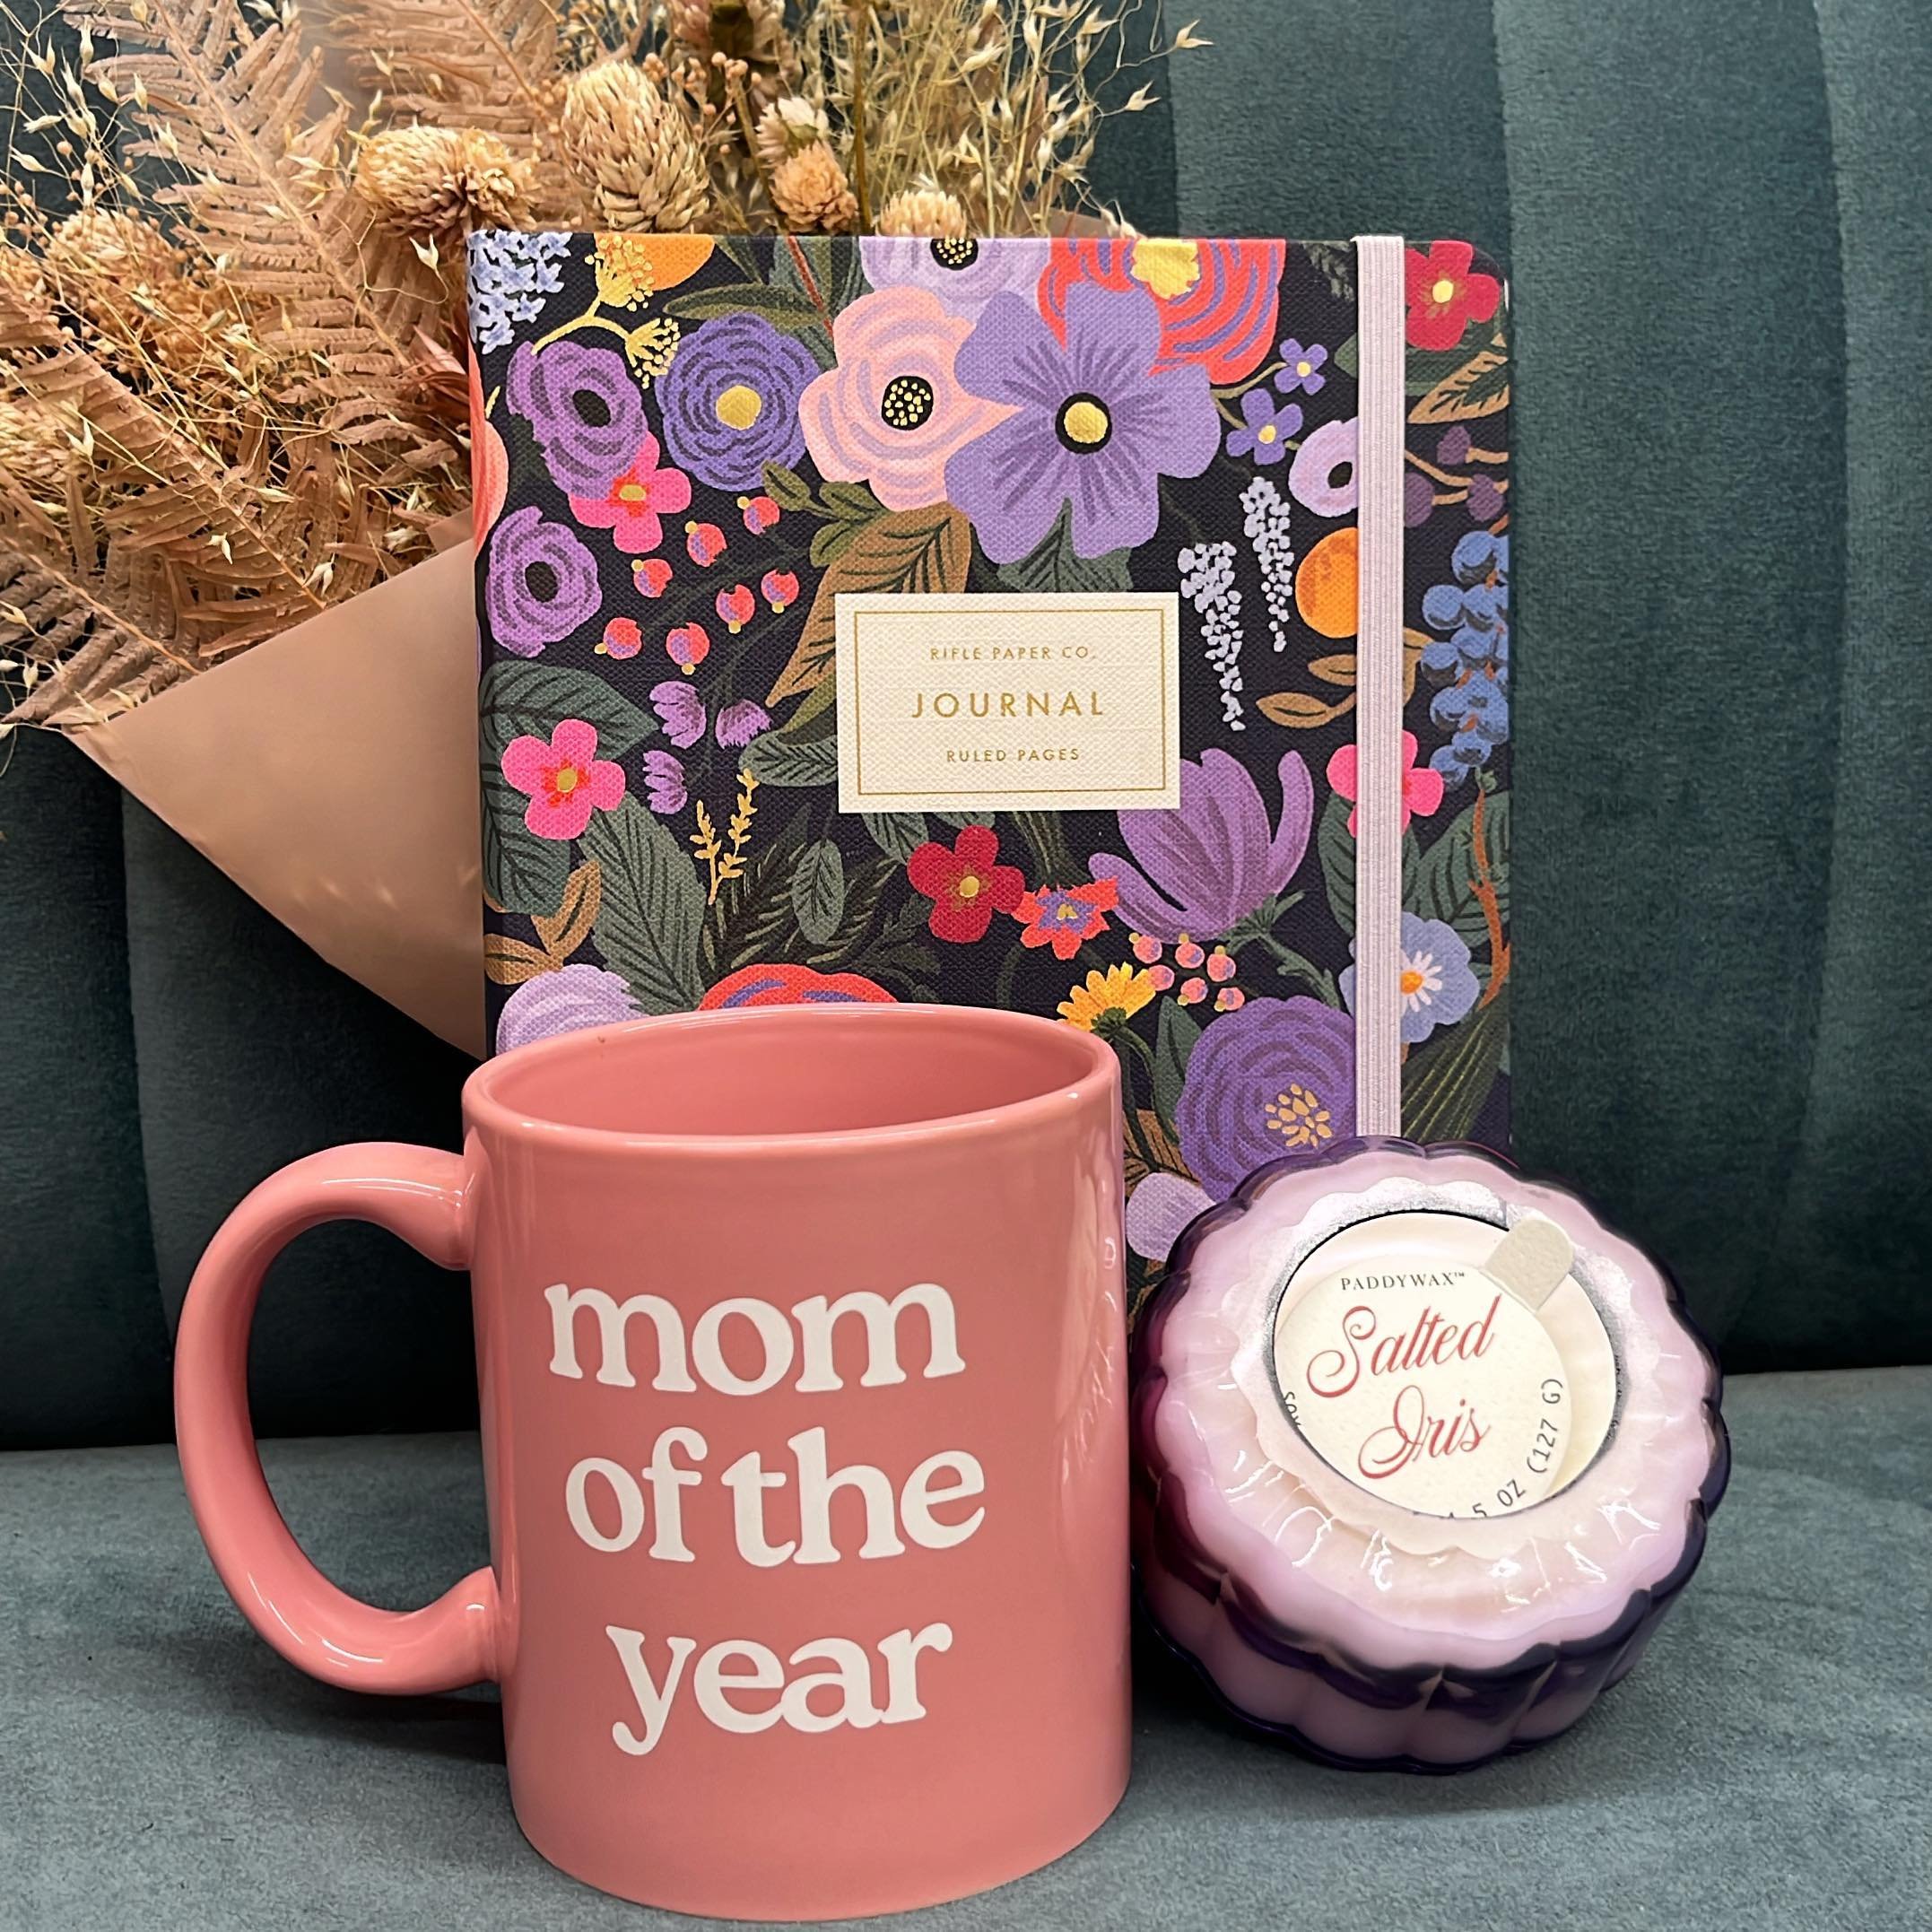 Mother&rsquo;s Day is coming up fast! How are you showing your mom love this year? 💕

#mothersdaygift #shoplocal #lavenderlover #flowersandcoffee #giftideas #giftsformom #downtowneugene #boutiqueshopping